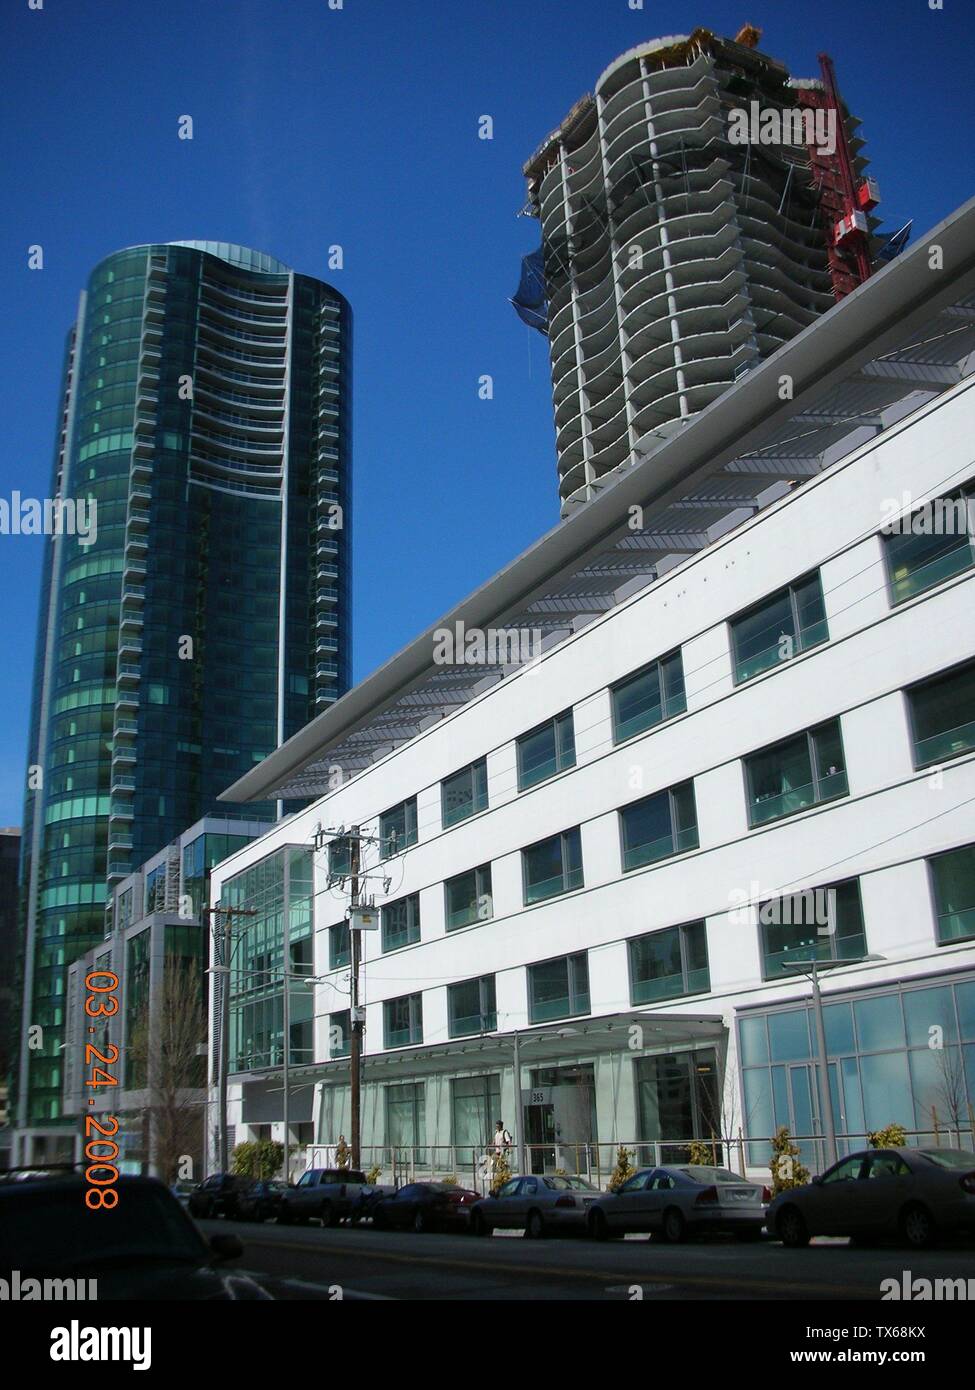 The Infinity (300 Spear Street) complex as viewed from the east. The completed tower II is on the left, while the under construction tower I is on the right.; 24 March 2008; Own work (Original text:  I created this work entirely by myself.); Cheers. Trance addict - Armin van Buuren - Oceanlab; Stock Photo